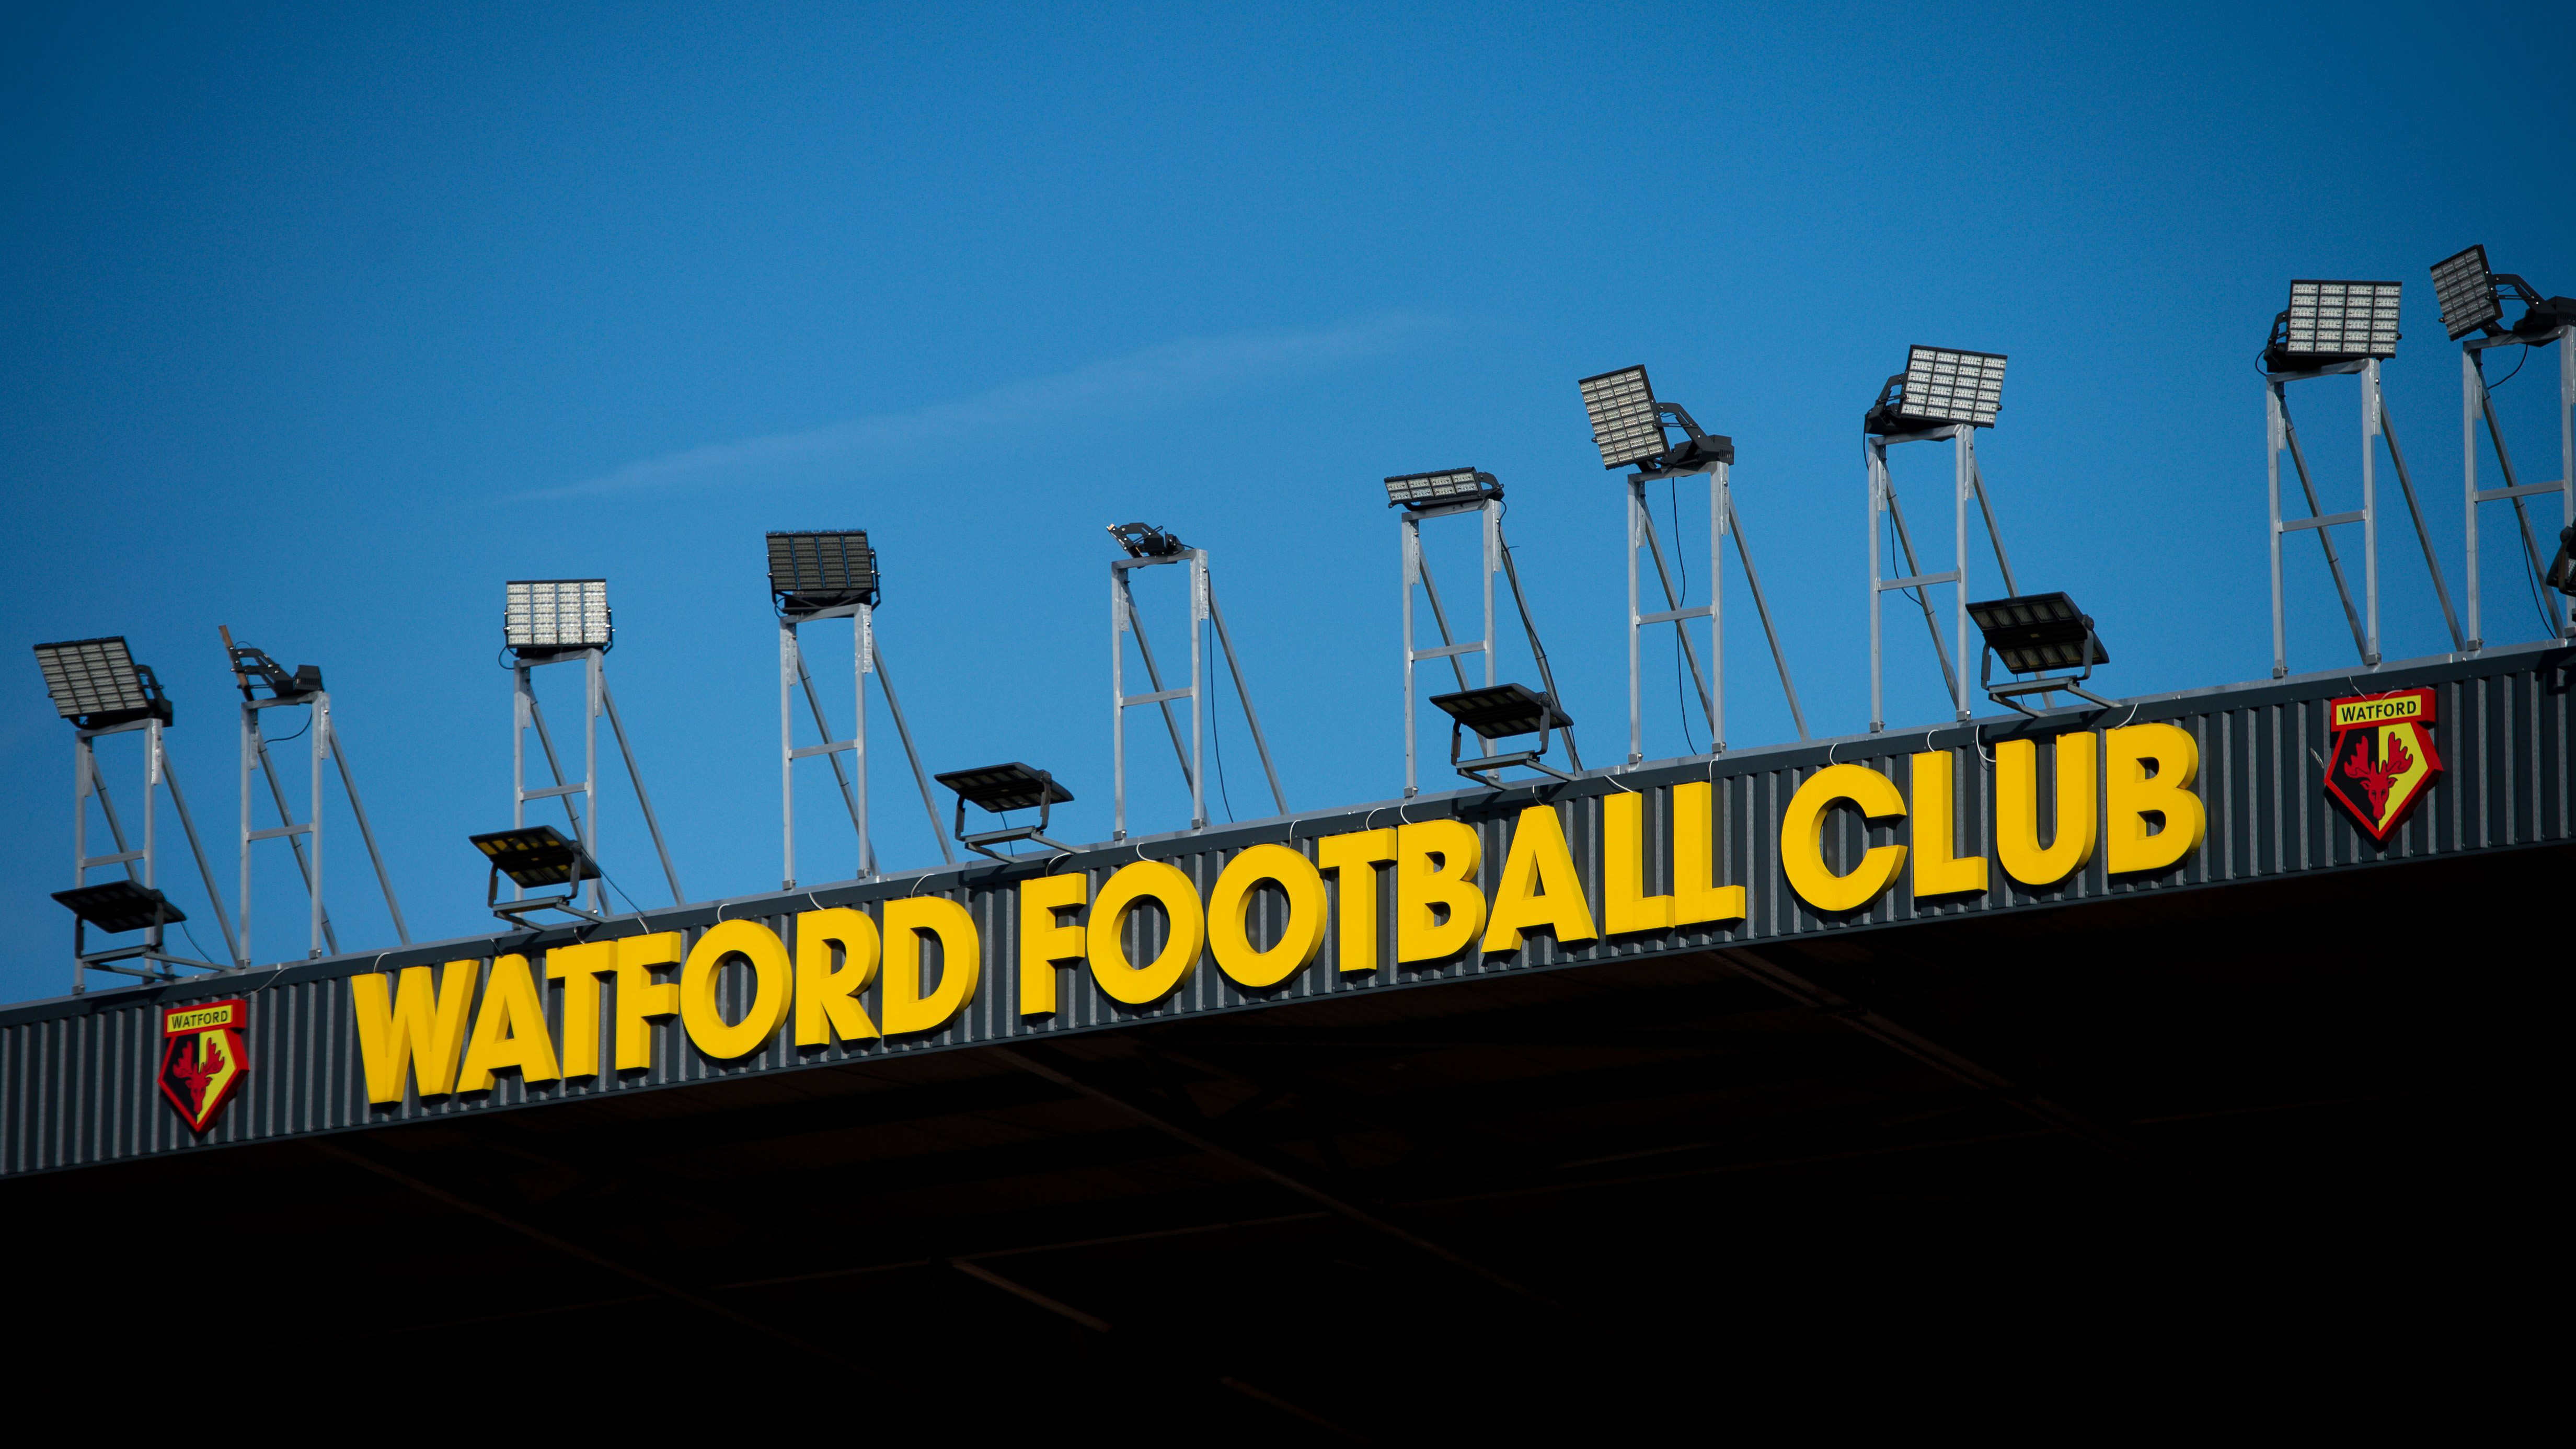 A close up of the words Watford Football Club written on the front of one of the stands